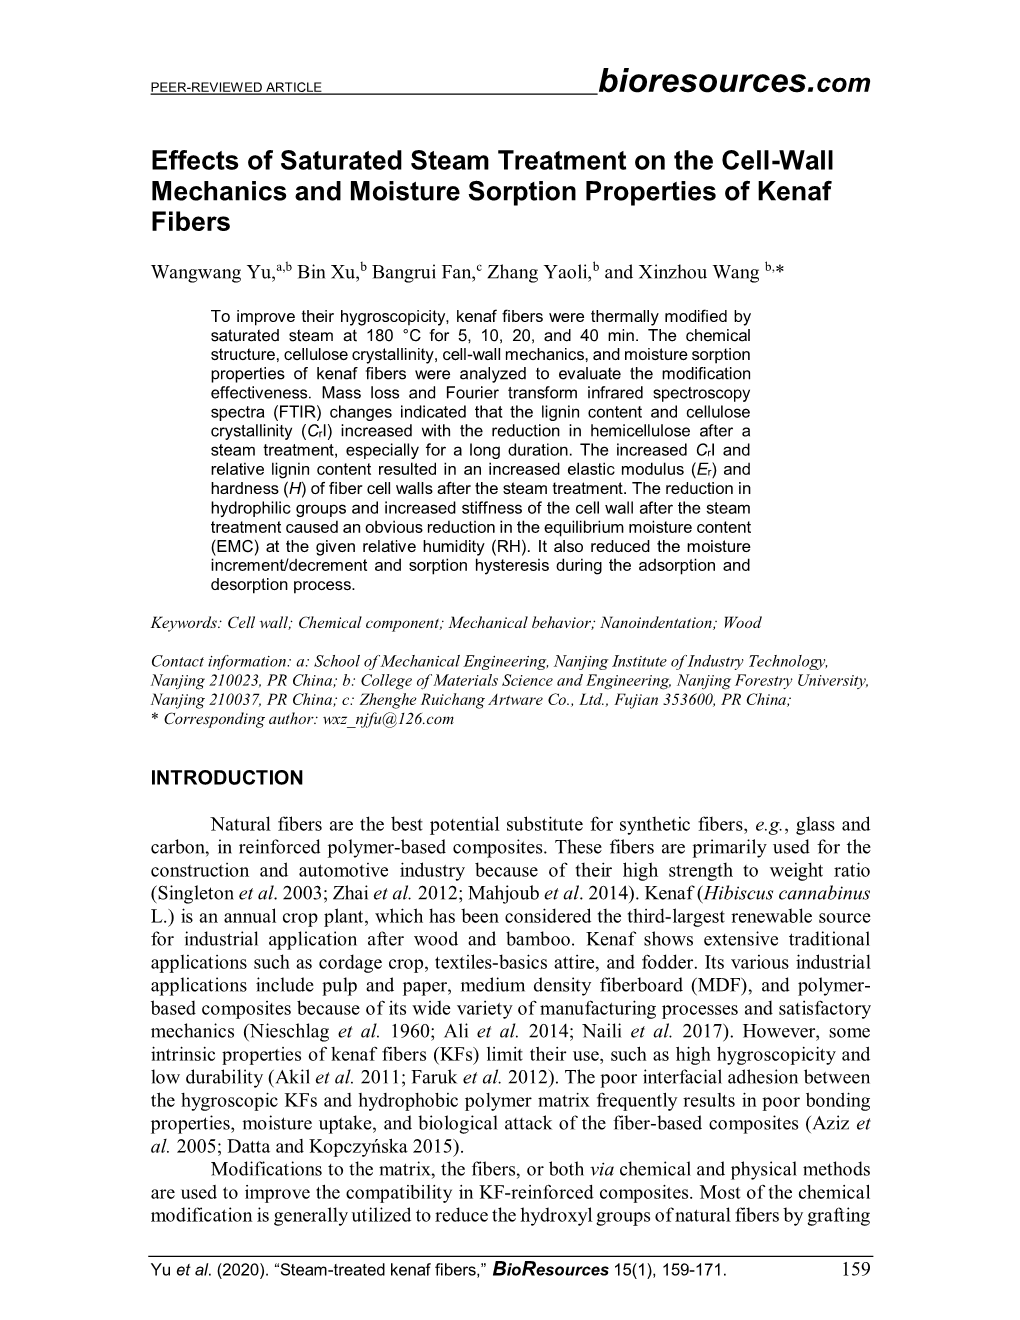 Effects of Saturated Steam Treatment on the Cell-Wall Mechanics and Moisture Sorption Properties of Kenaf Fibers